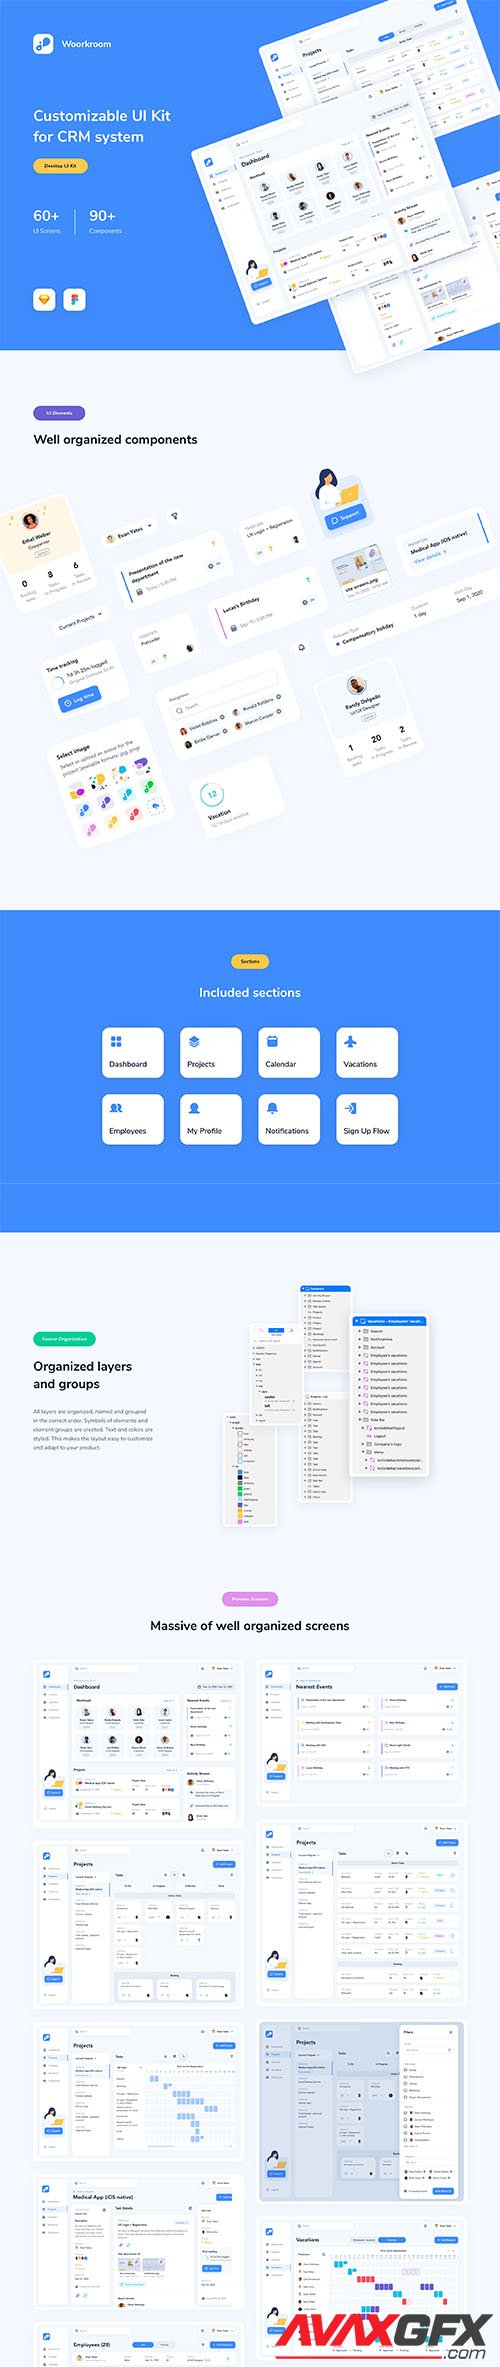 UI For a CRM System